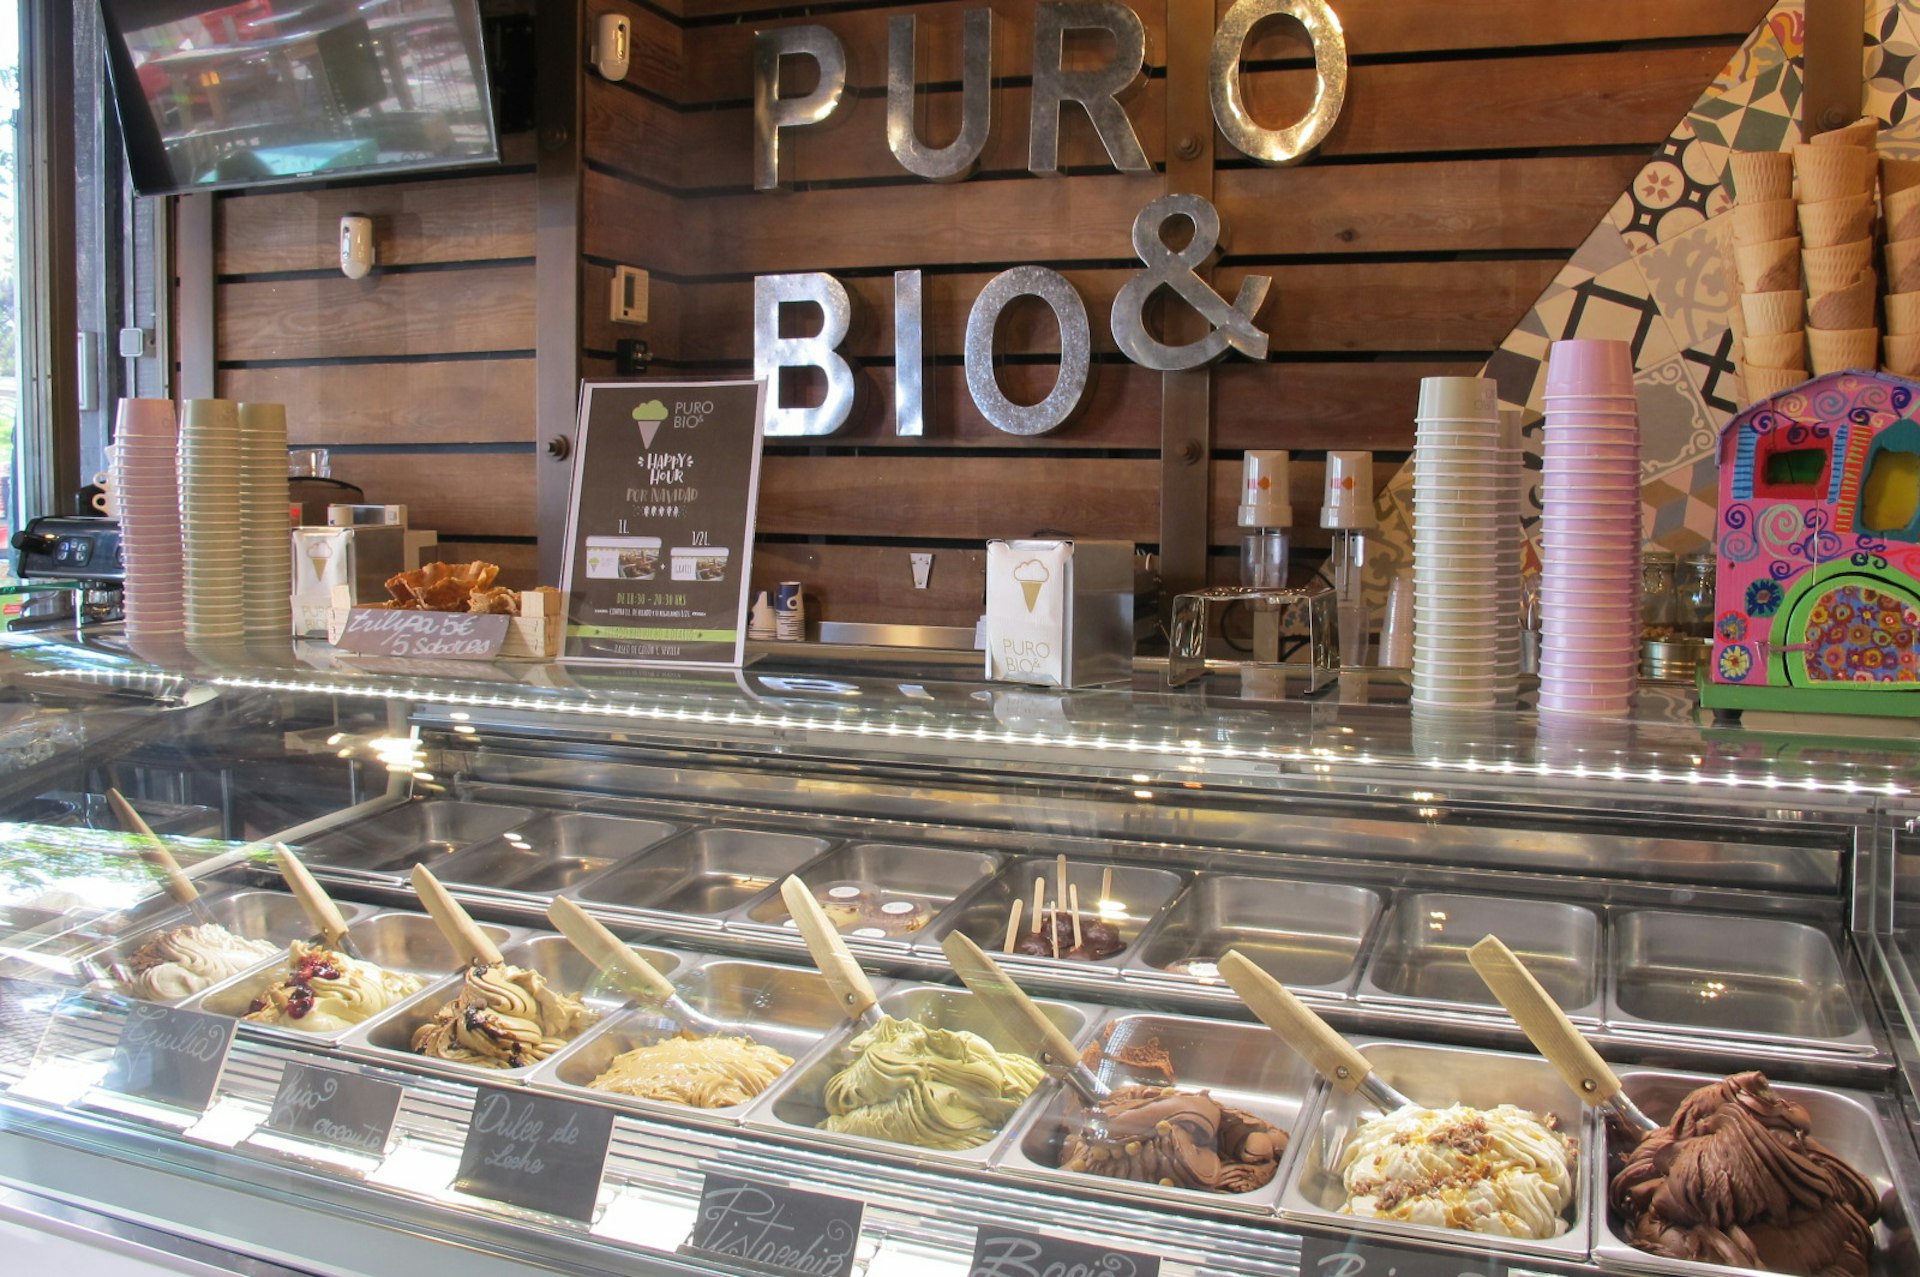 Puro e Bio is the spot for vegan and organic treats © Fiona Flores Watson / Lonely Planet